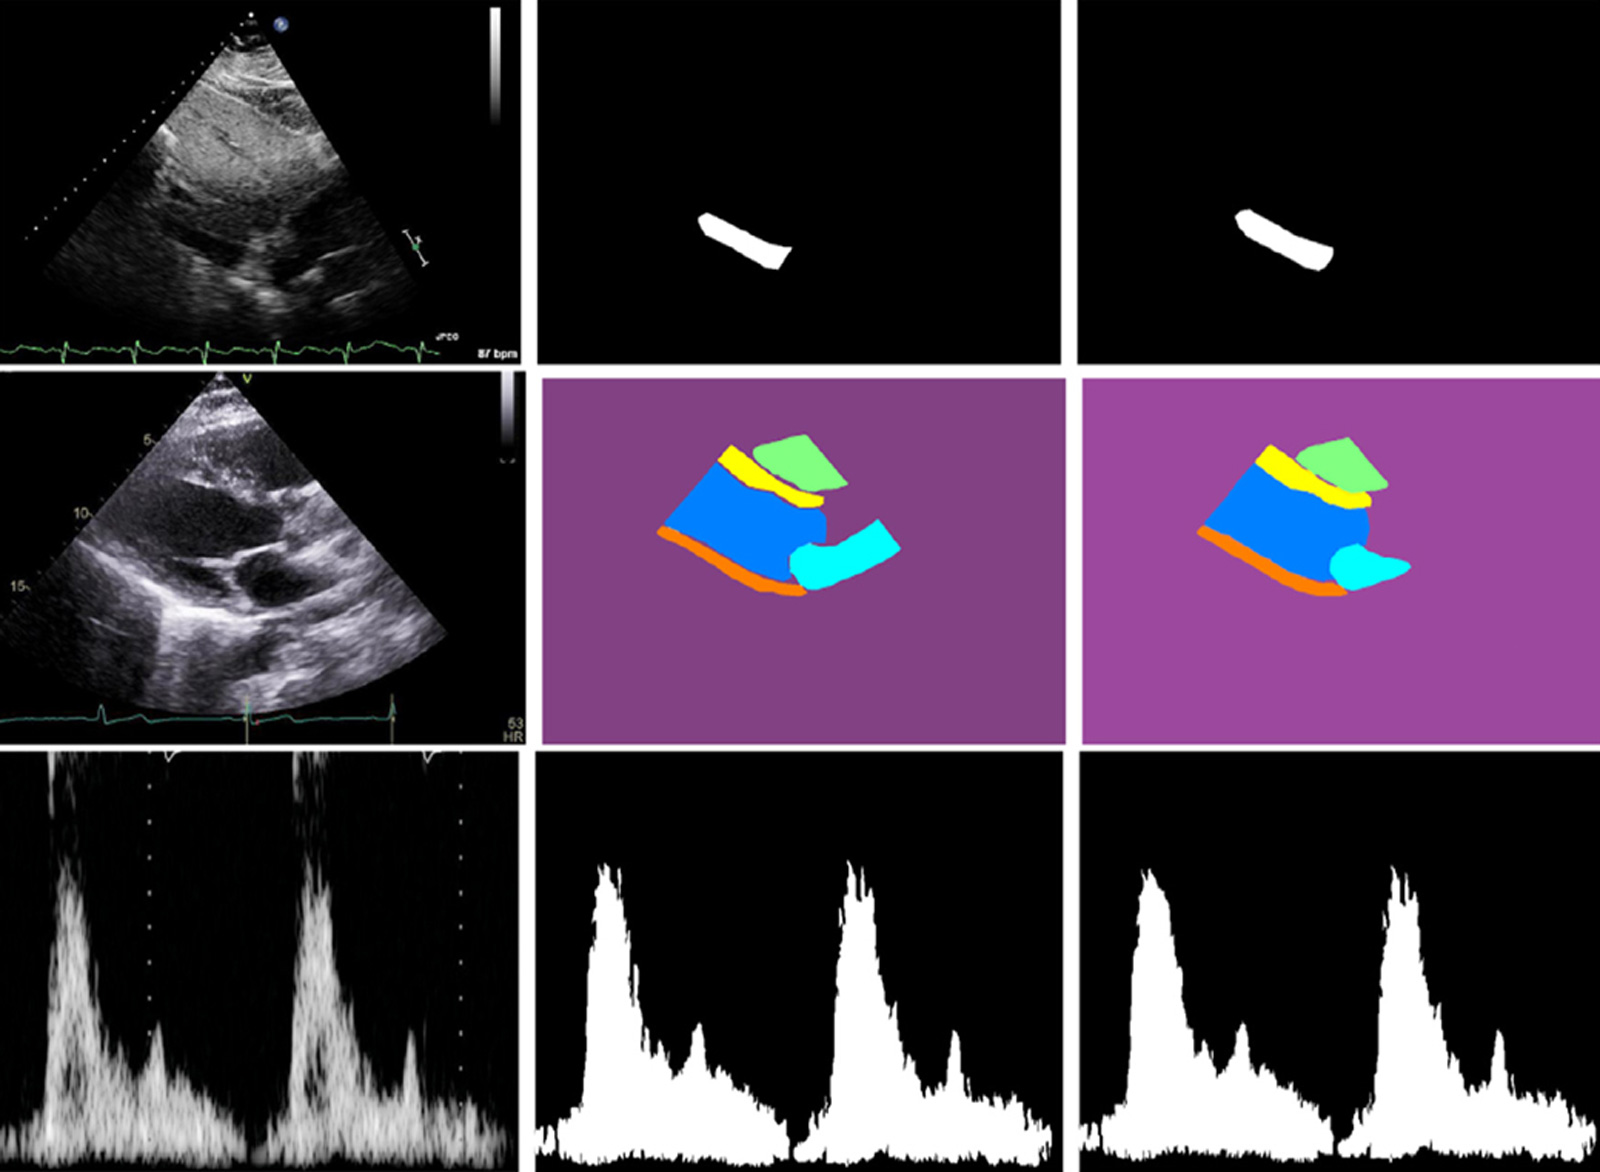 Diagram showing ultrasound images of a heart and charting heartbeat